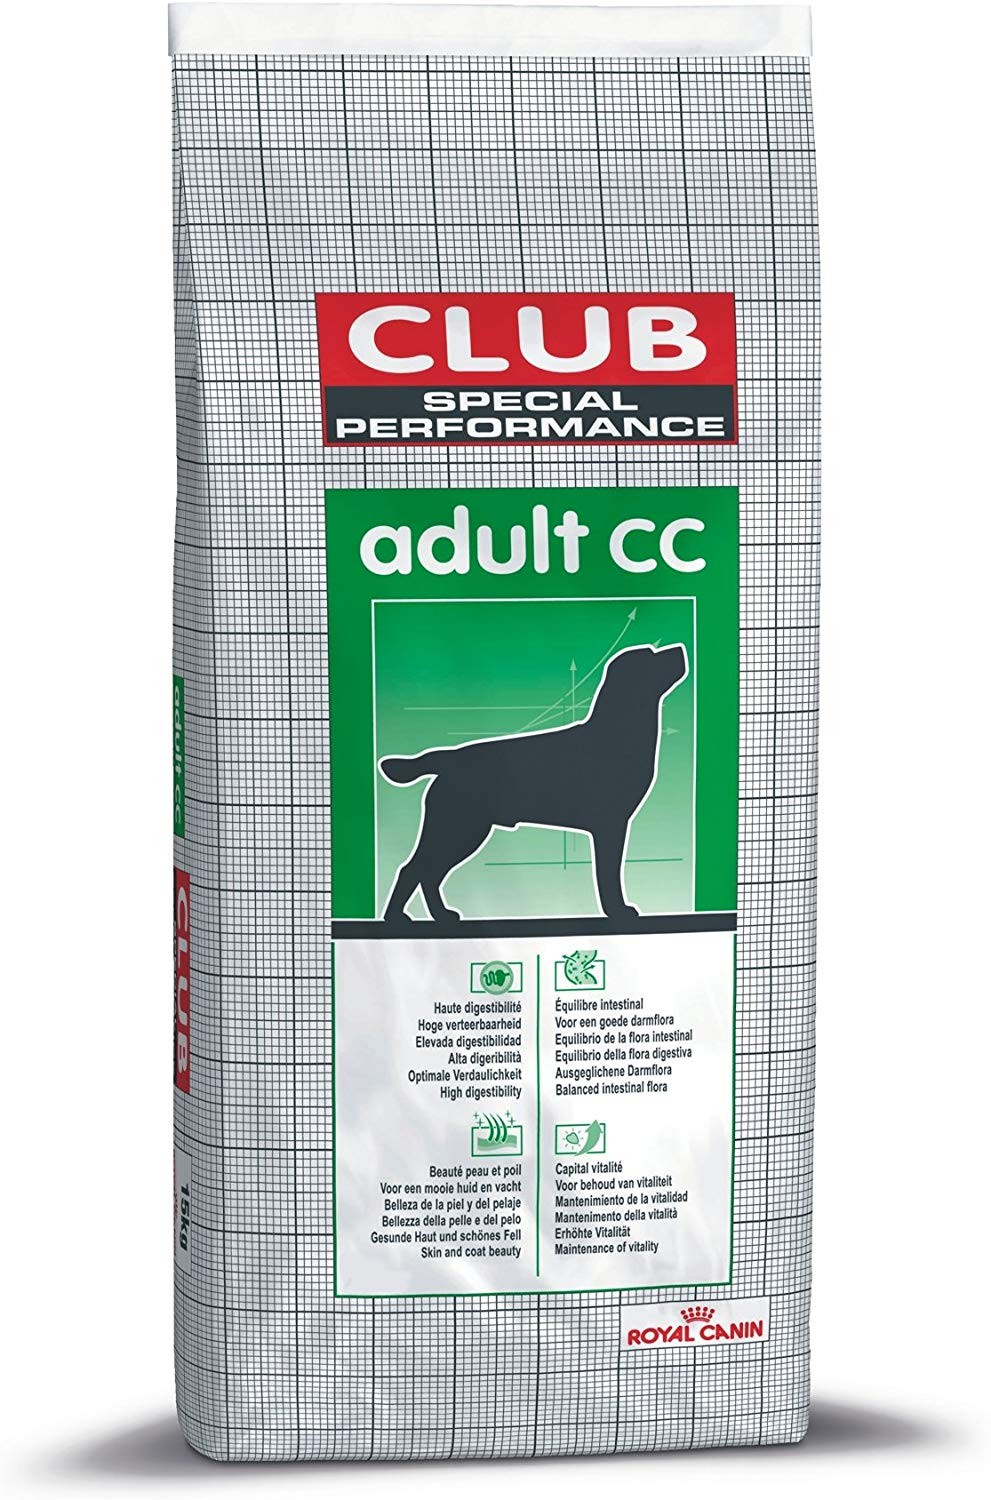 ROYAL CANIN CLUB Special Performance Adult CC Pienso para perros